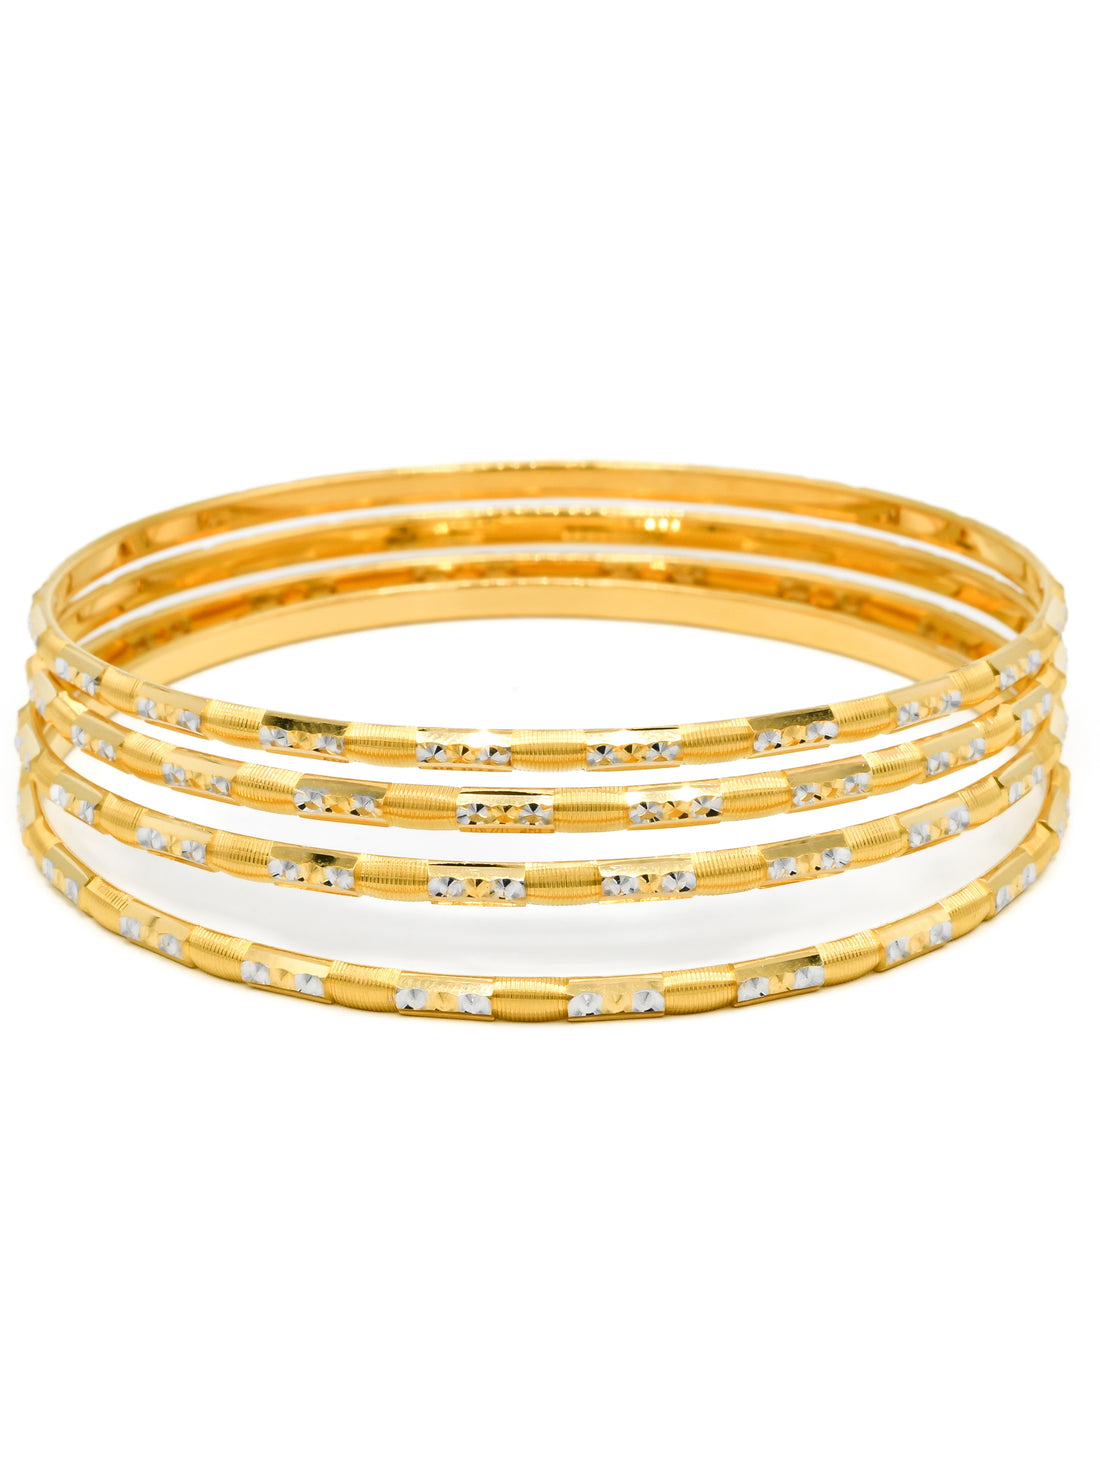 22ct Gold Two Tone Set of 4 Solid Bangles - Roop Darshan